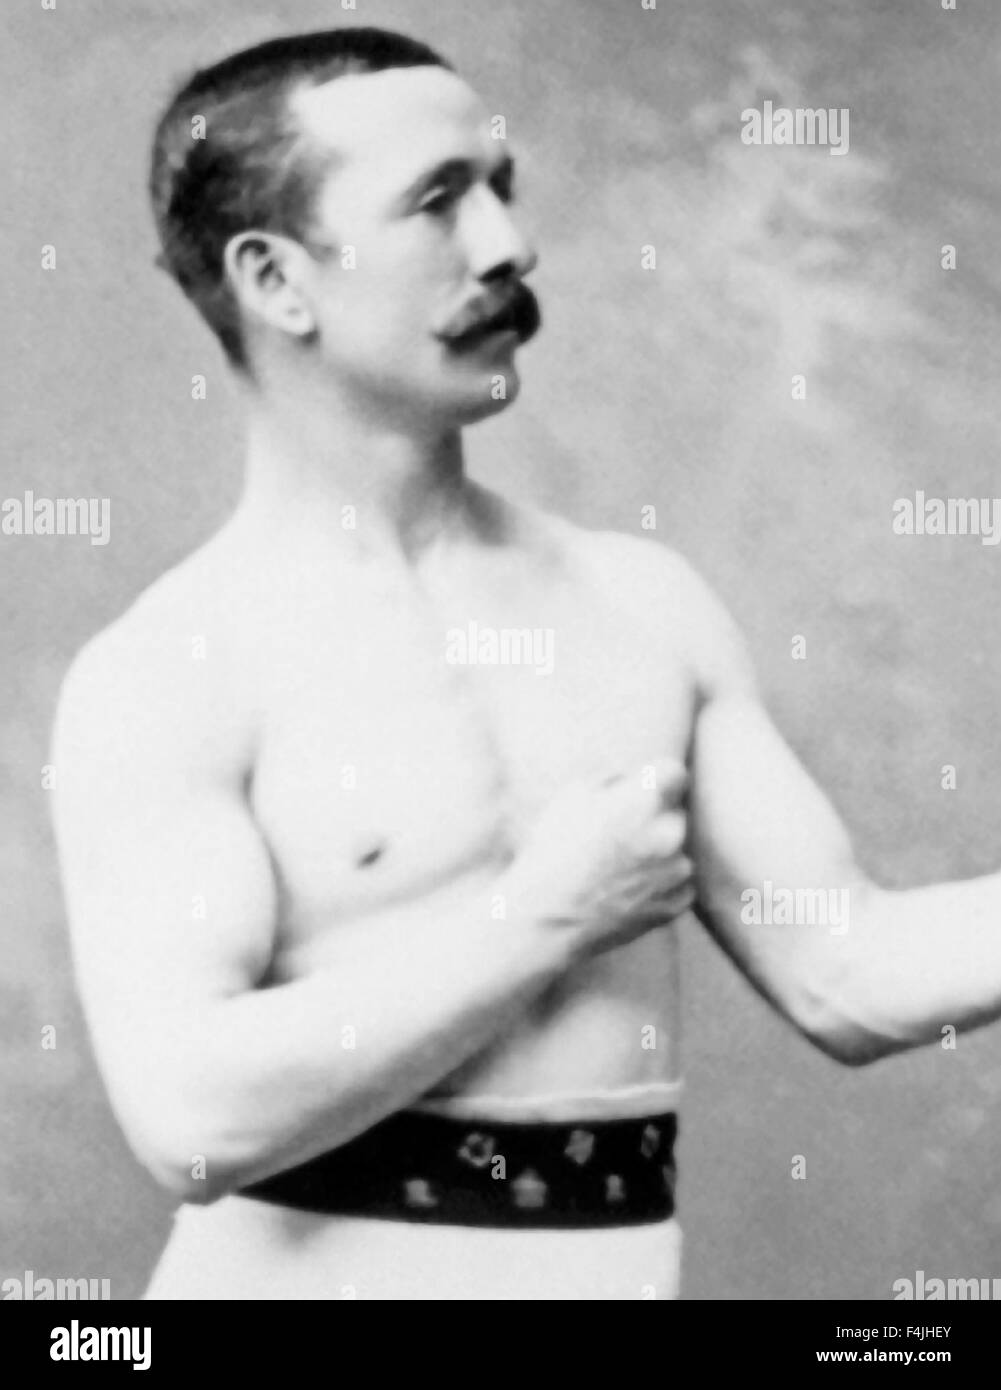 Vintage photo of Irish-American boxer John H Clark (1849 - 1922). Clark,  nicknamed "Professor", was born in County Galway, Ireland, but spent most  of his life in the US. He was active